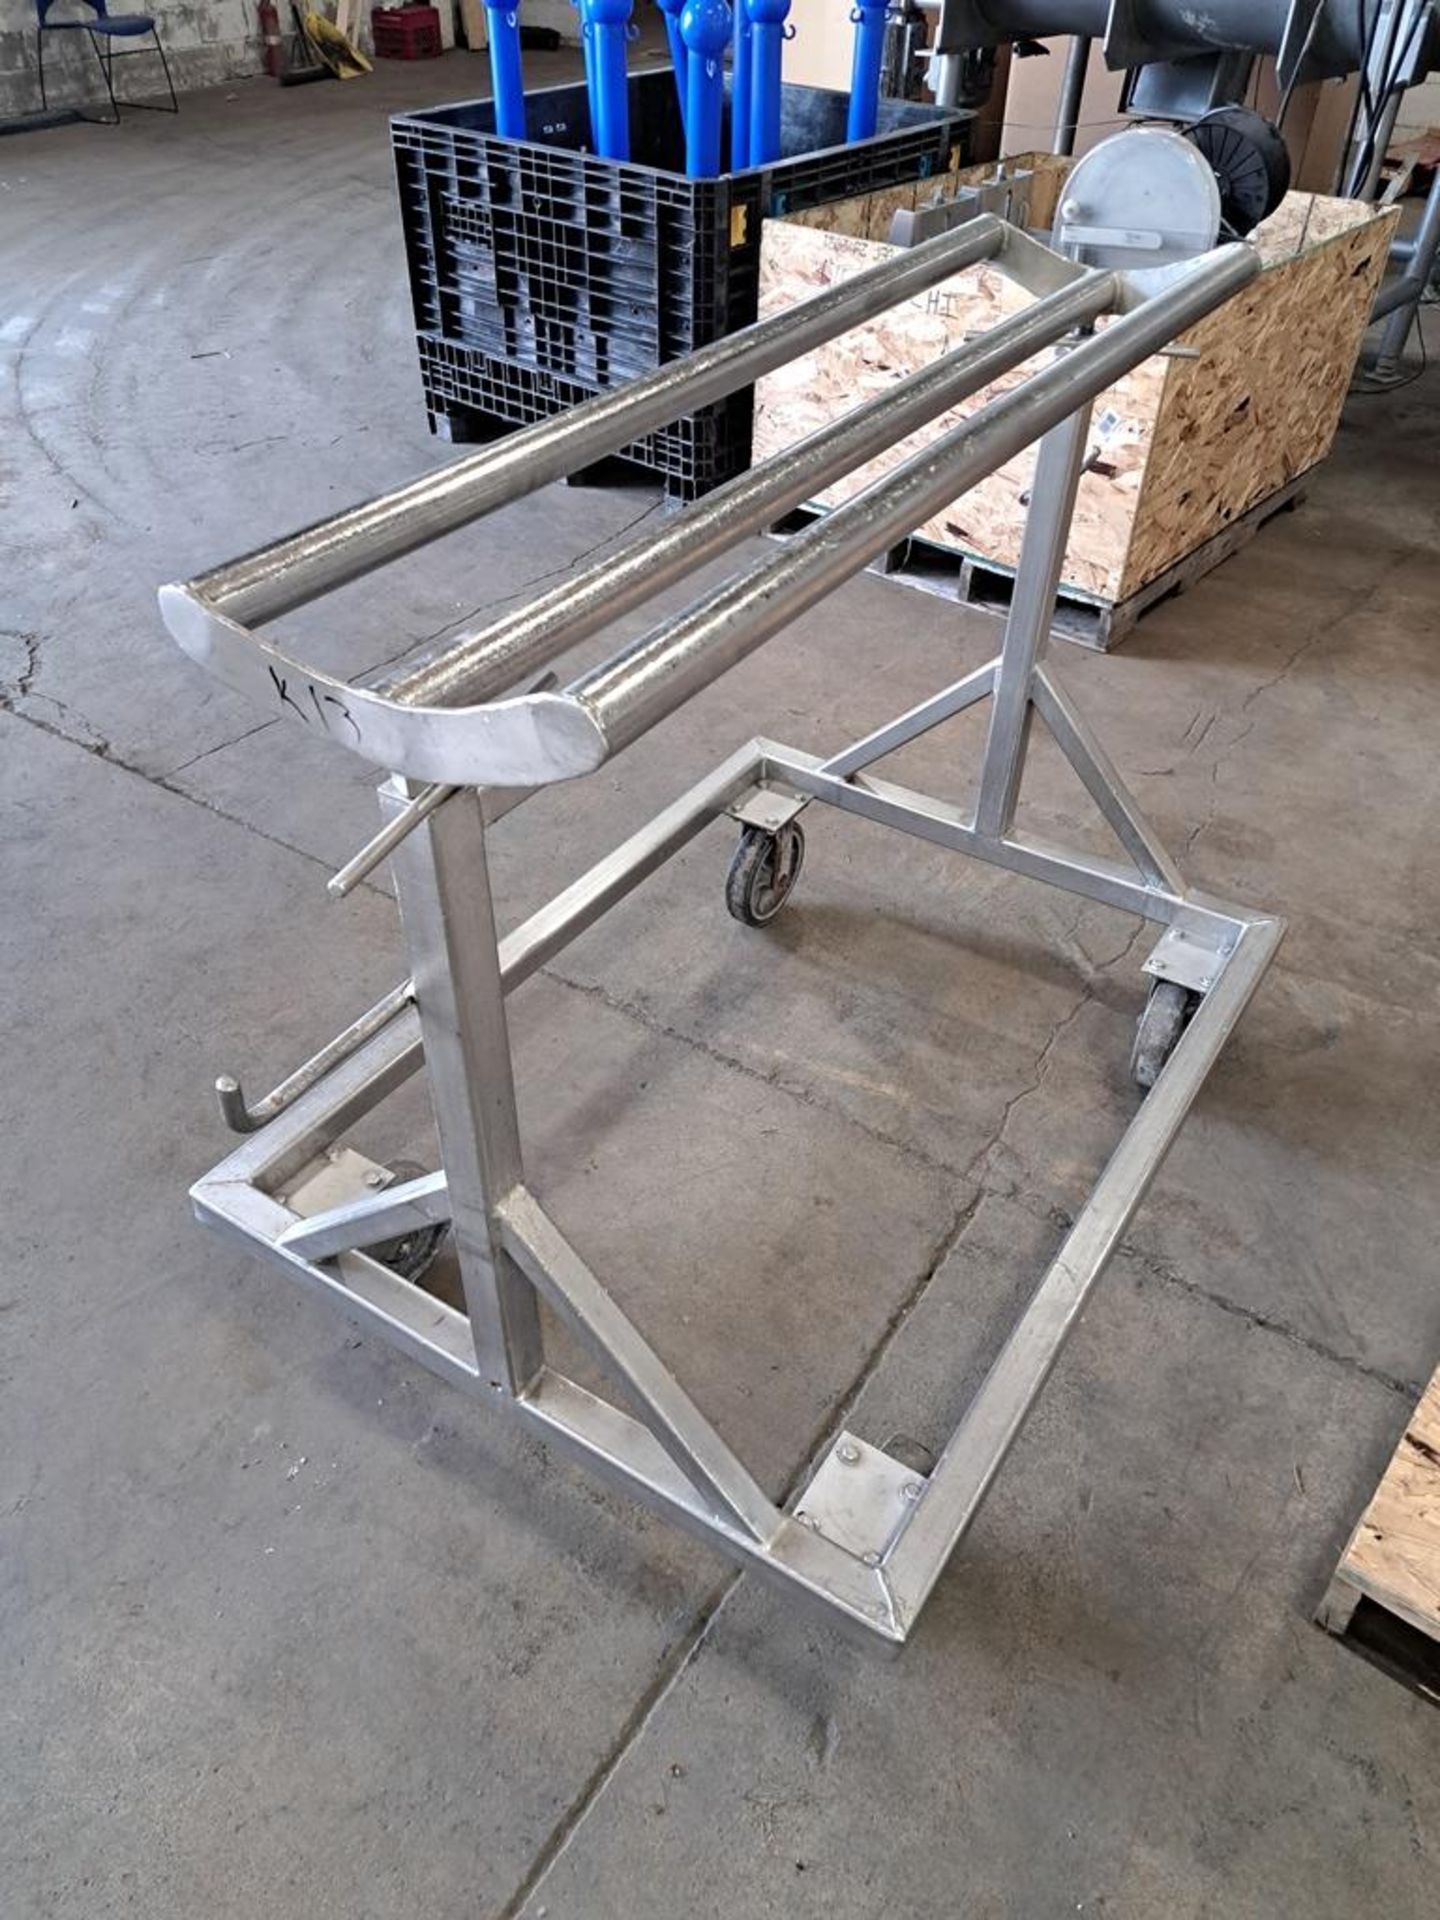 Stainless Steel Auger Cart, 48" Long carriage, Located In Plano, IL (Required Loading Fee: $25.